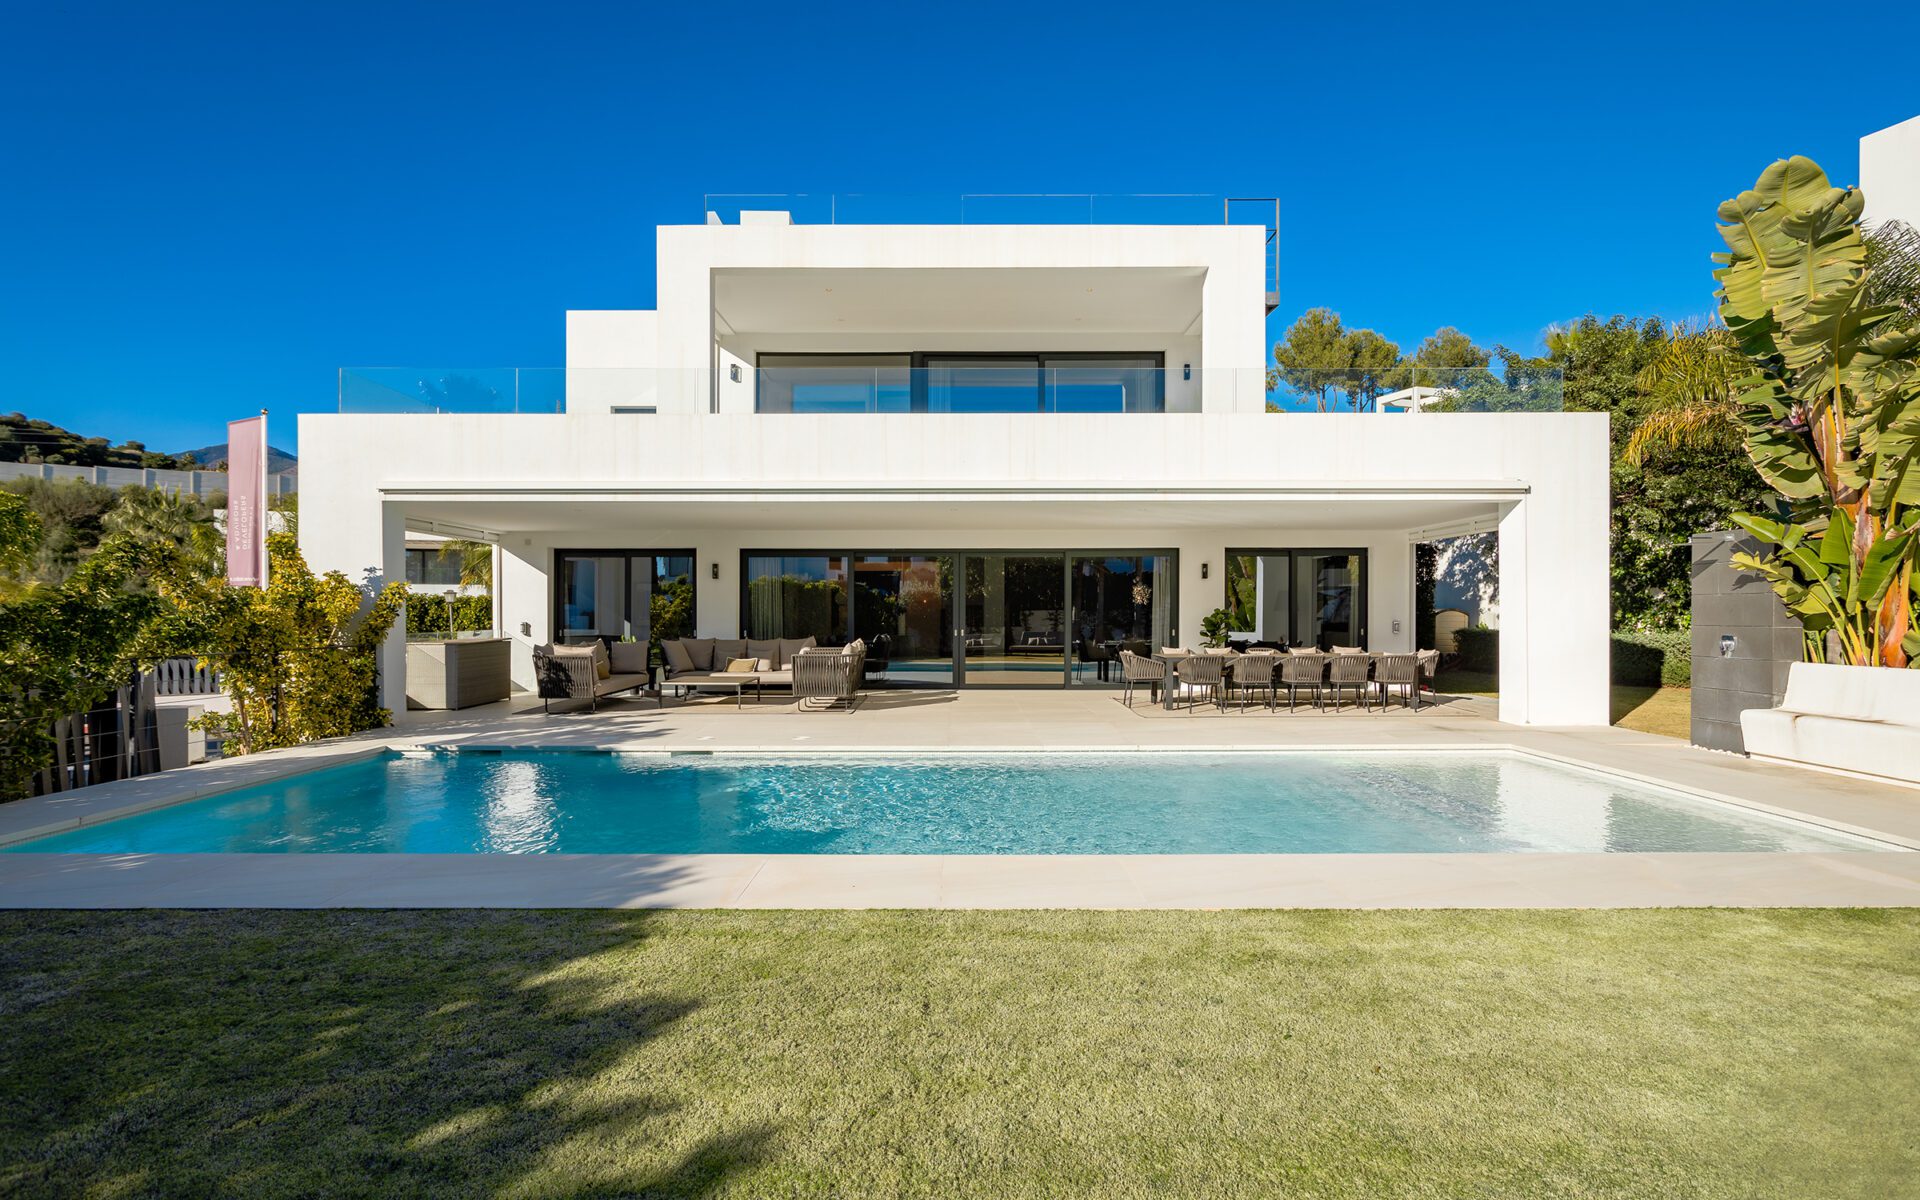 CONTEMPORARY LUXURY VILLA IN A PRESTIGIOUS GATED COMMUNITY WITHIN THE GOLF VALLEY